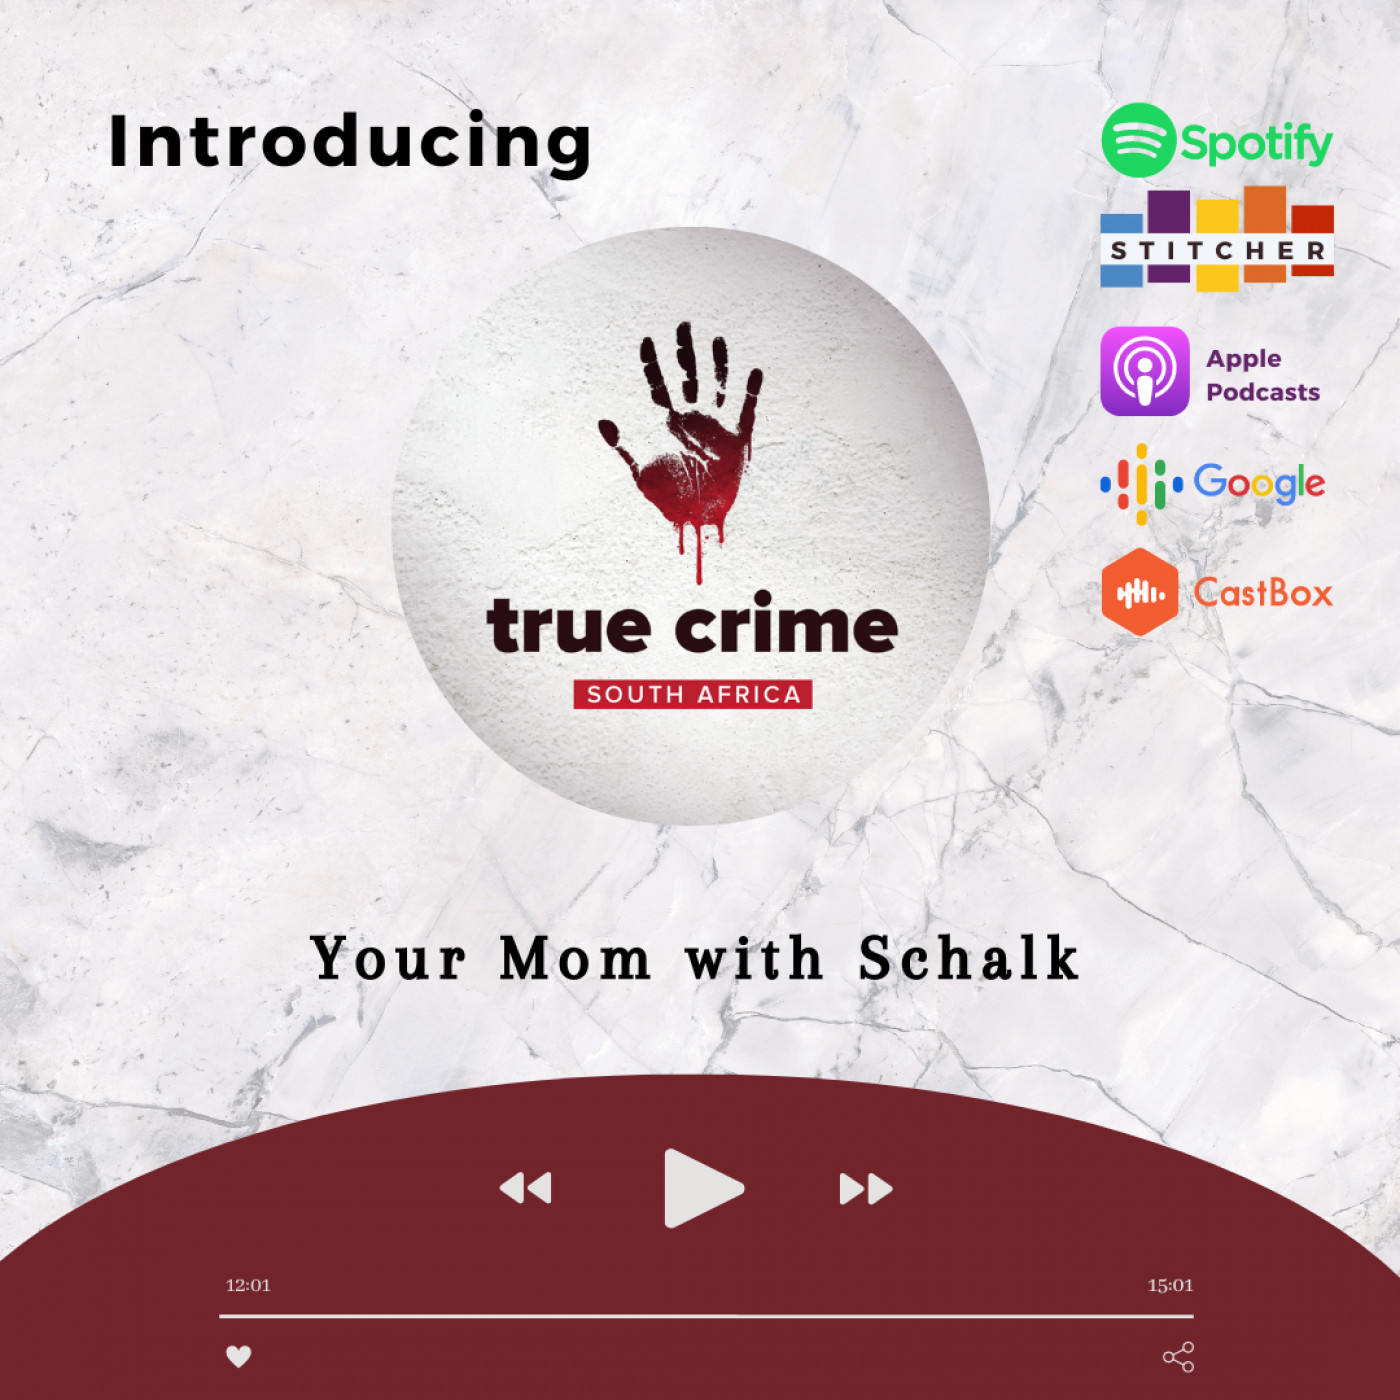 Introducing: Your Mom with Schalk